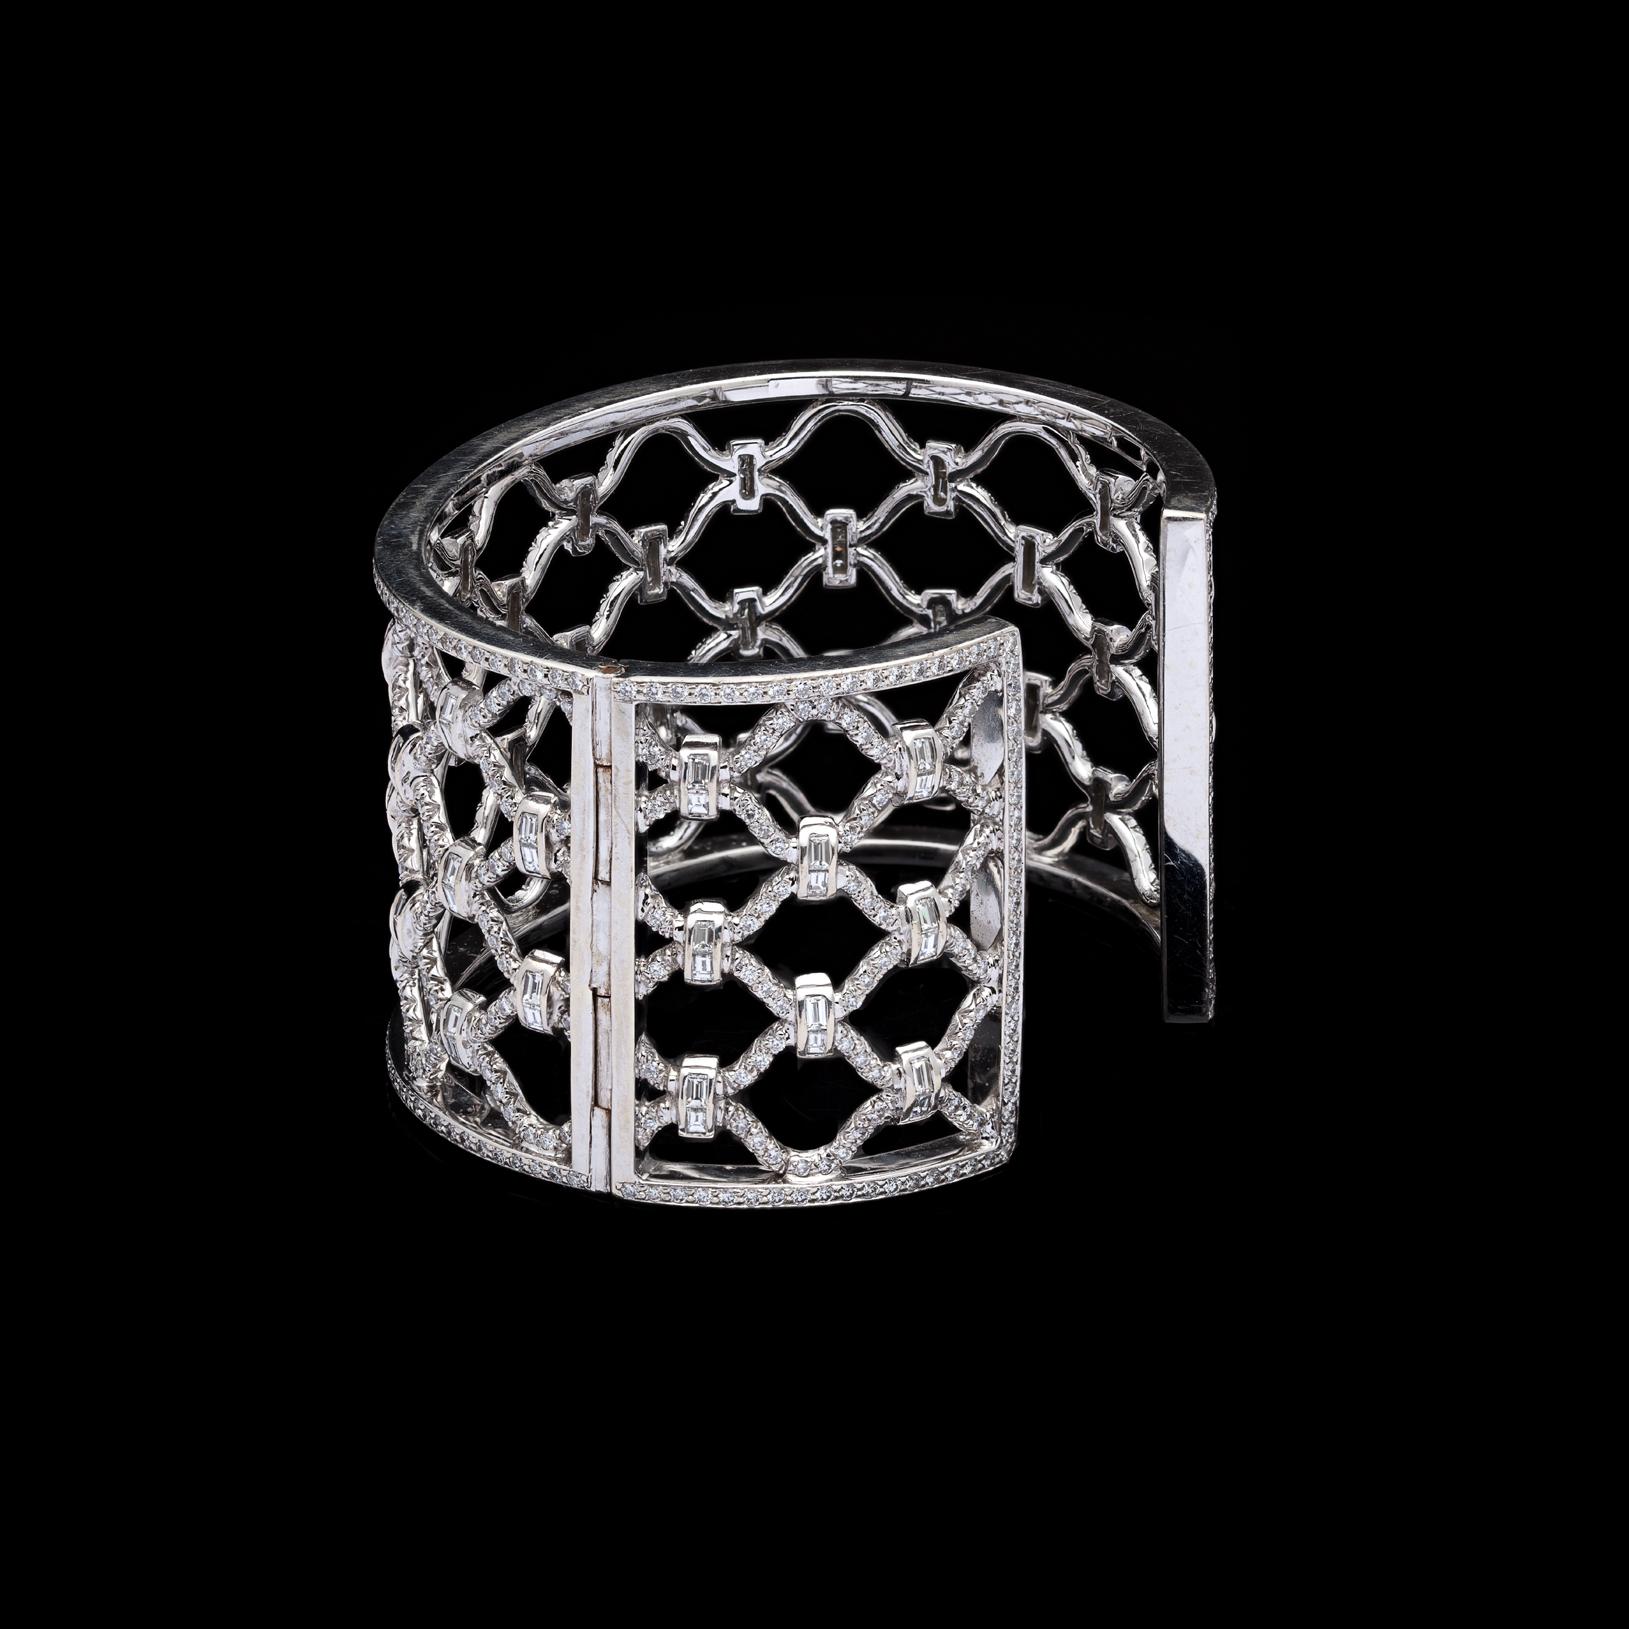 Inspired by the intricate grillwork of London gates, Verdura adapted this familiar pattern into his creations in the 1940s. The 18k white gold Kensington bracelet is set with 740 pavé round brilliant and baguette-cut diamonds, with a total weight